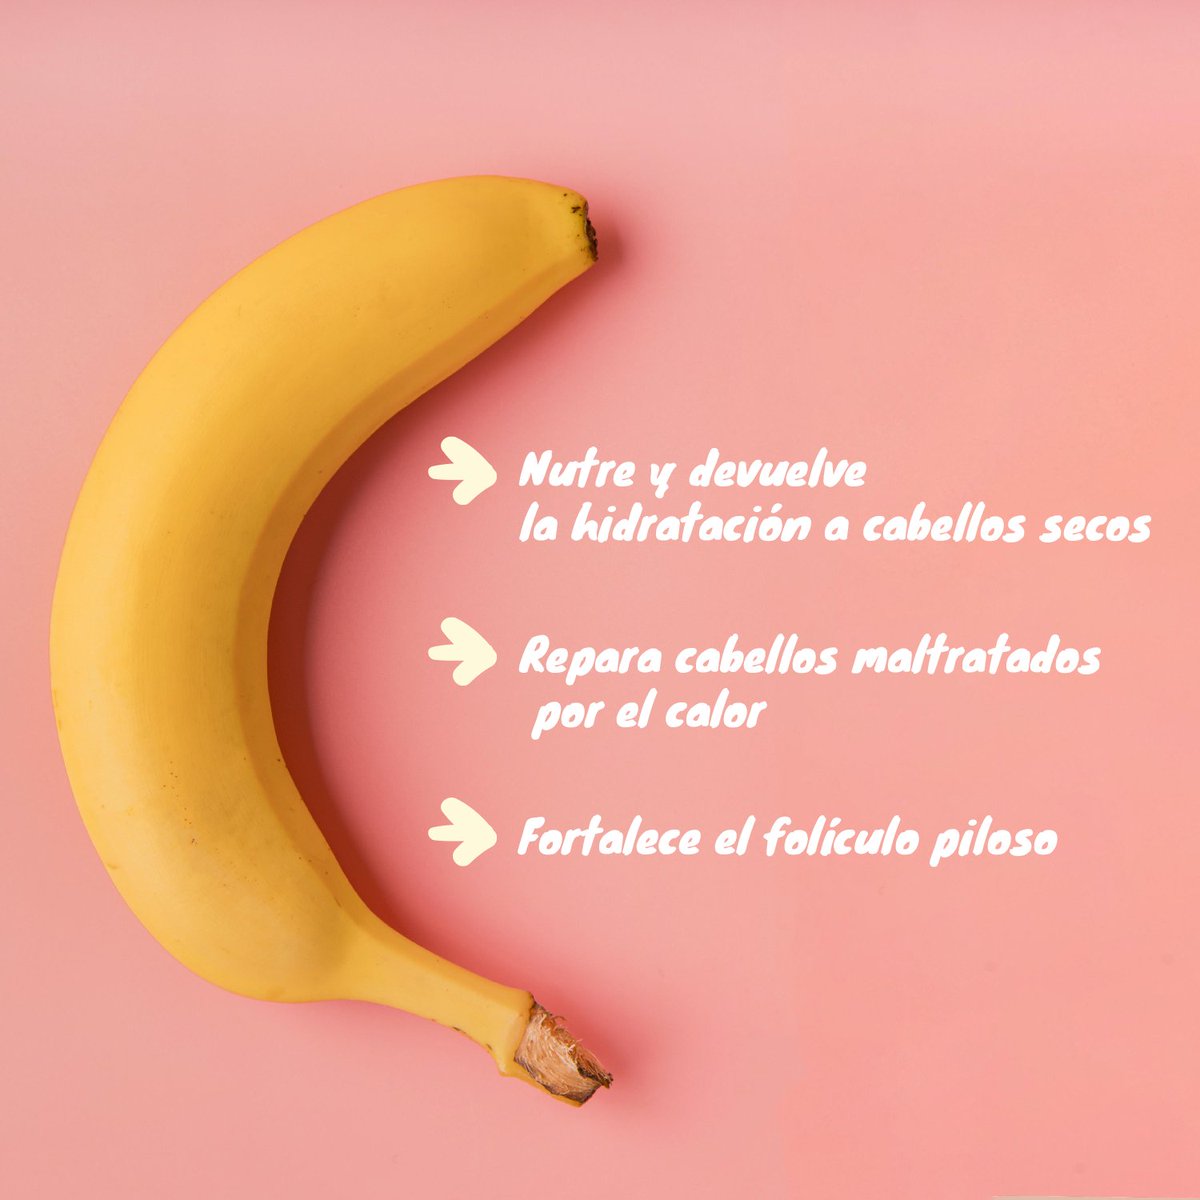 Sometimes the best beauty benefits are found in a fruit🍌💛⁣

#haircare #healthyhair #hair #vegan #crueltyfree #naturallybased #haircaretips #hairstylist #plantbased #hairproducts #consciousbeauty #greenbeauty #naturalcosmetics #naturalcosmetic #ethicallifestyle #veganbeauty